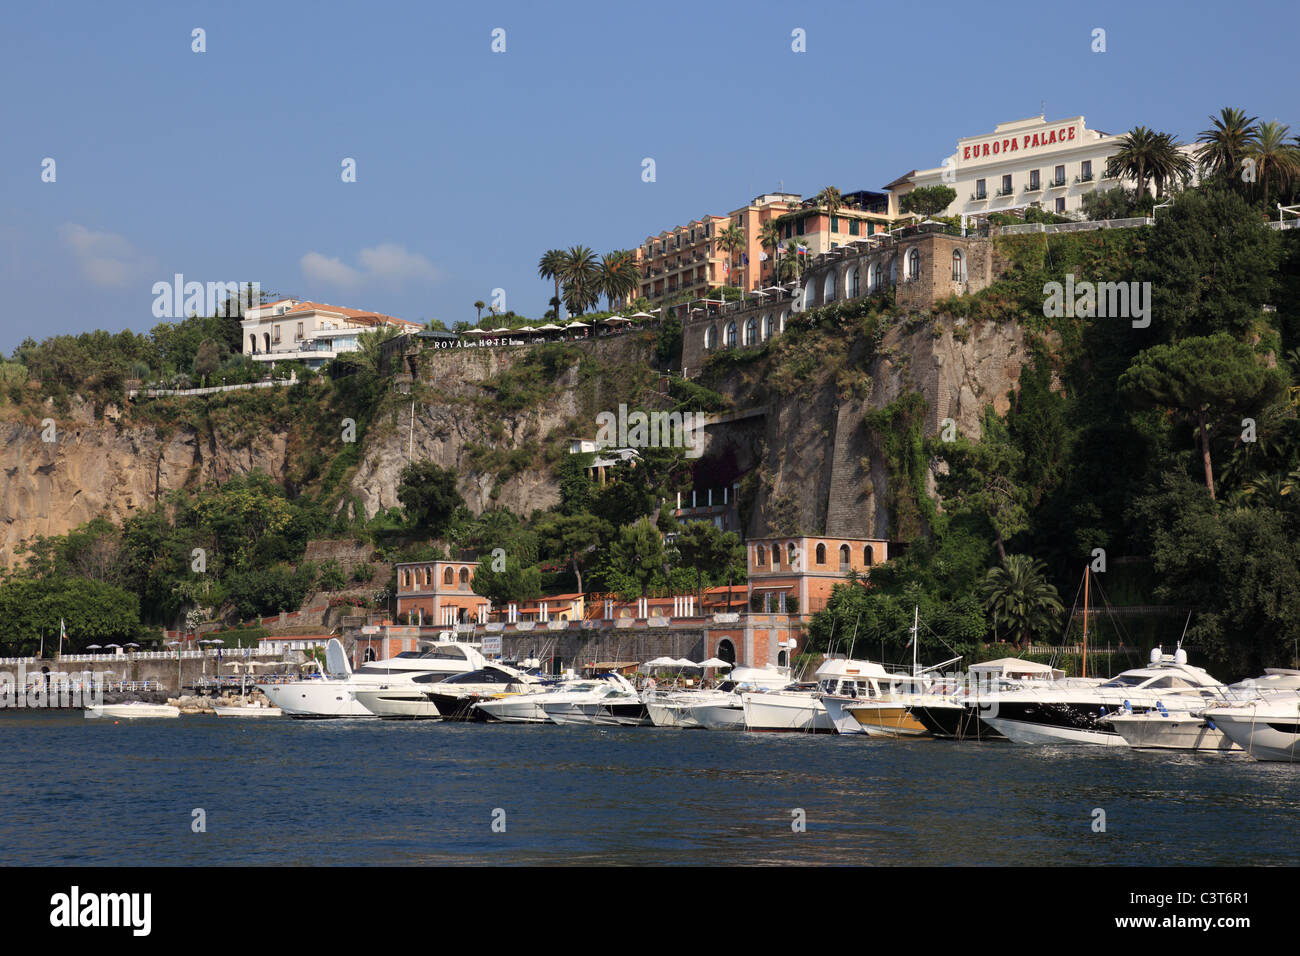 Sorrento harbour and cliffside hotels, Sorrento, Bay of Naples, Italy Stock Photo